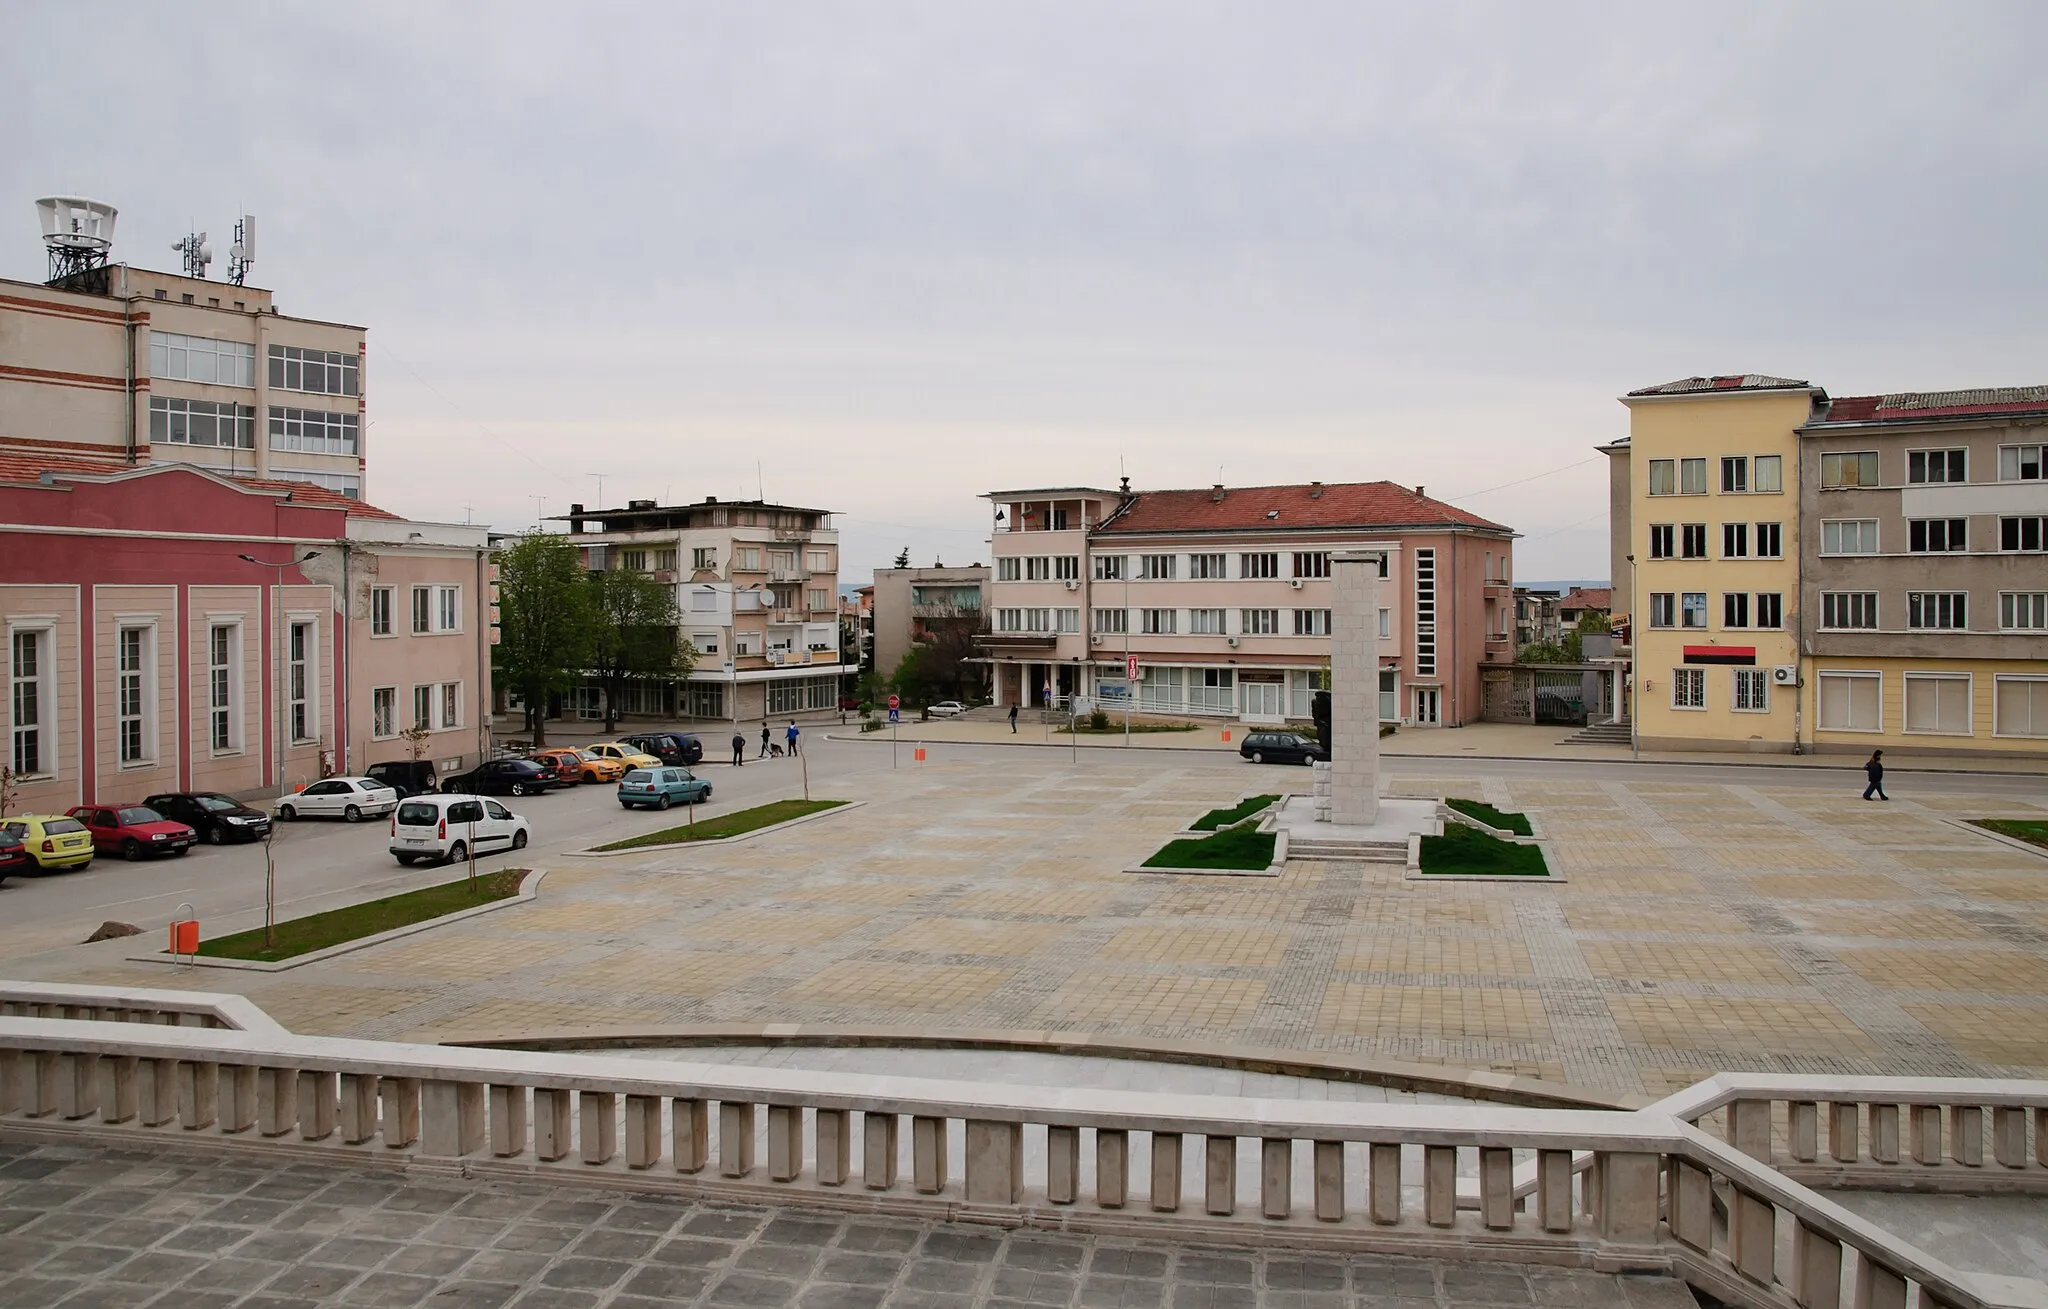 Photo showing: The central square in the town of Lyaskovets, Veliko Tarnovo province, Bulgaria.